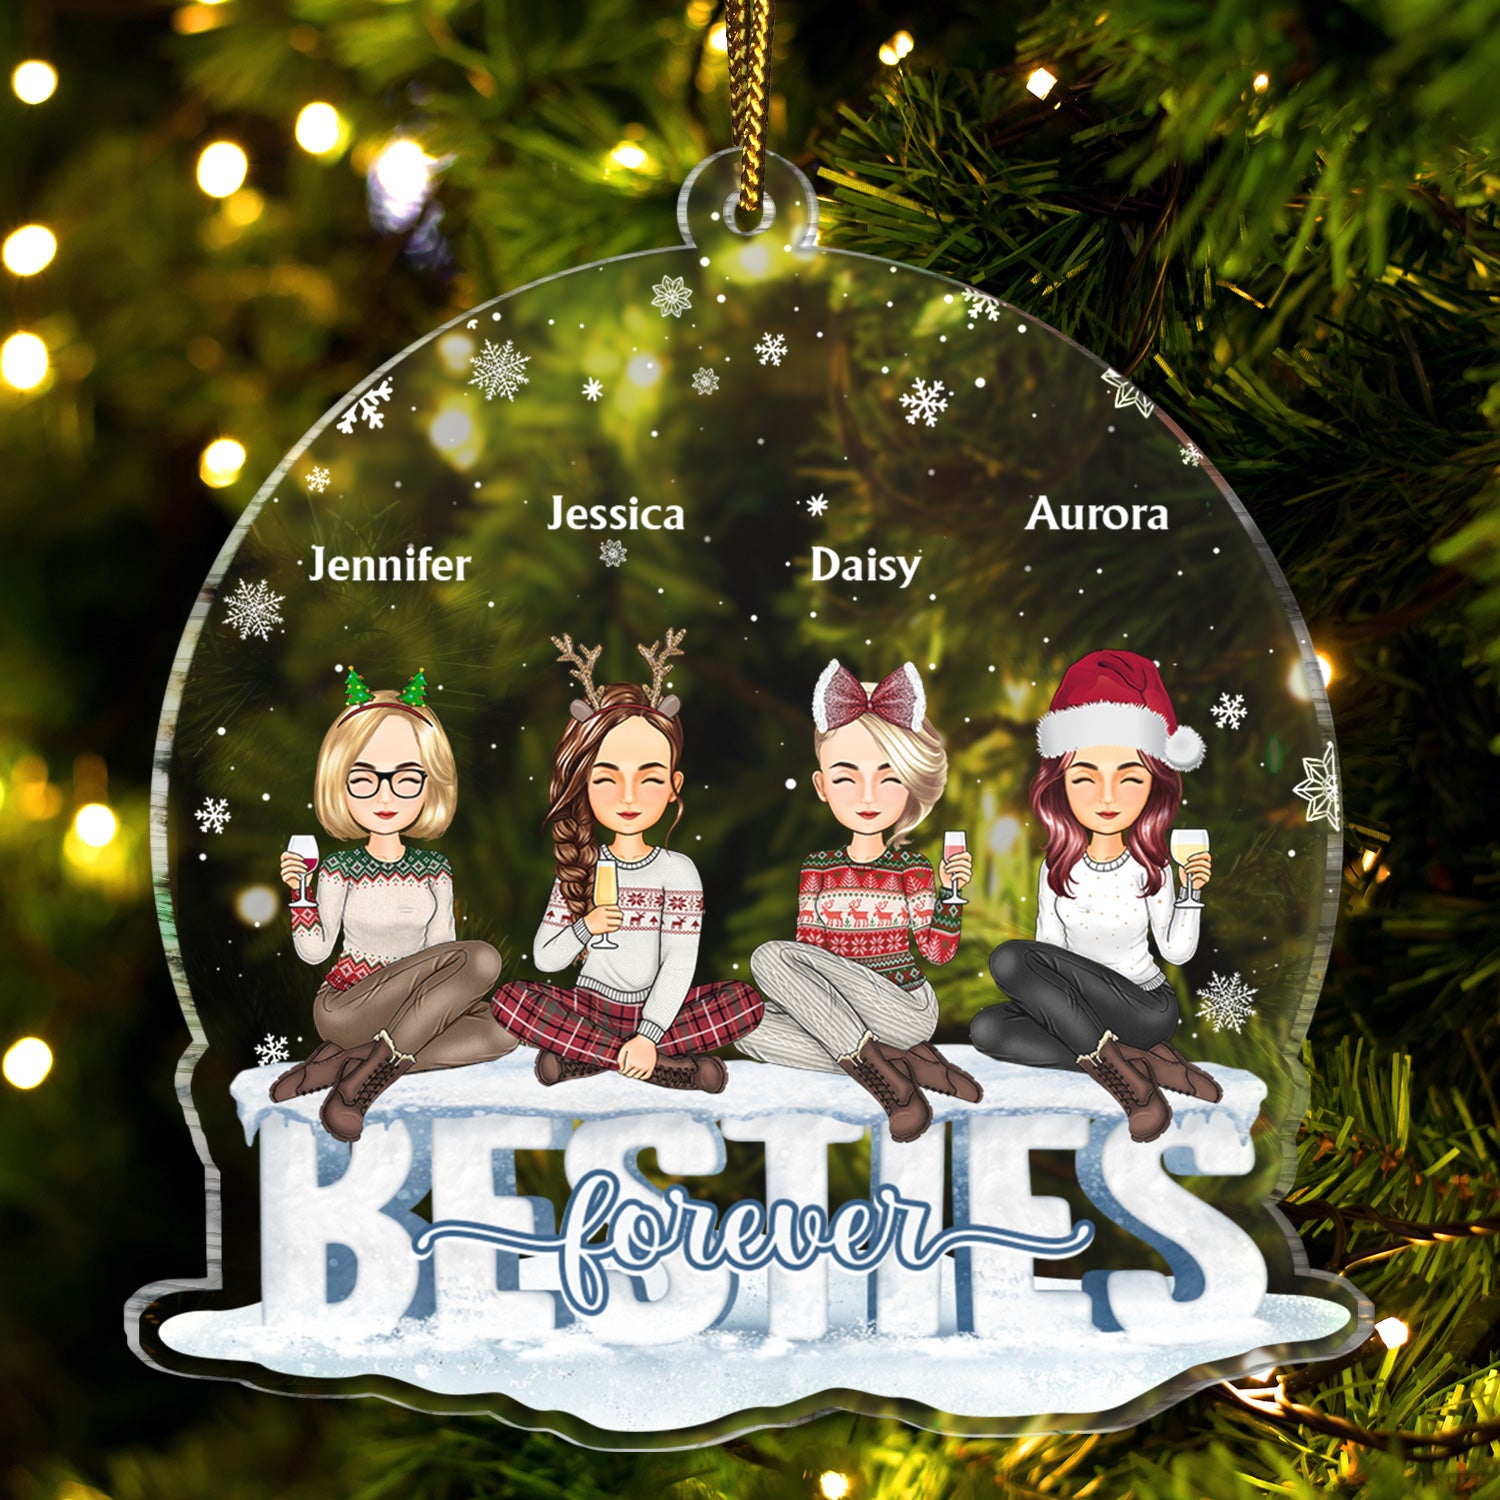 Besties Forever - Christmas Gift For Best Friends, Sisters, Colleagues - Personalized Custom Shaped Acrylic Ornament